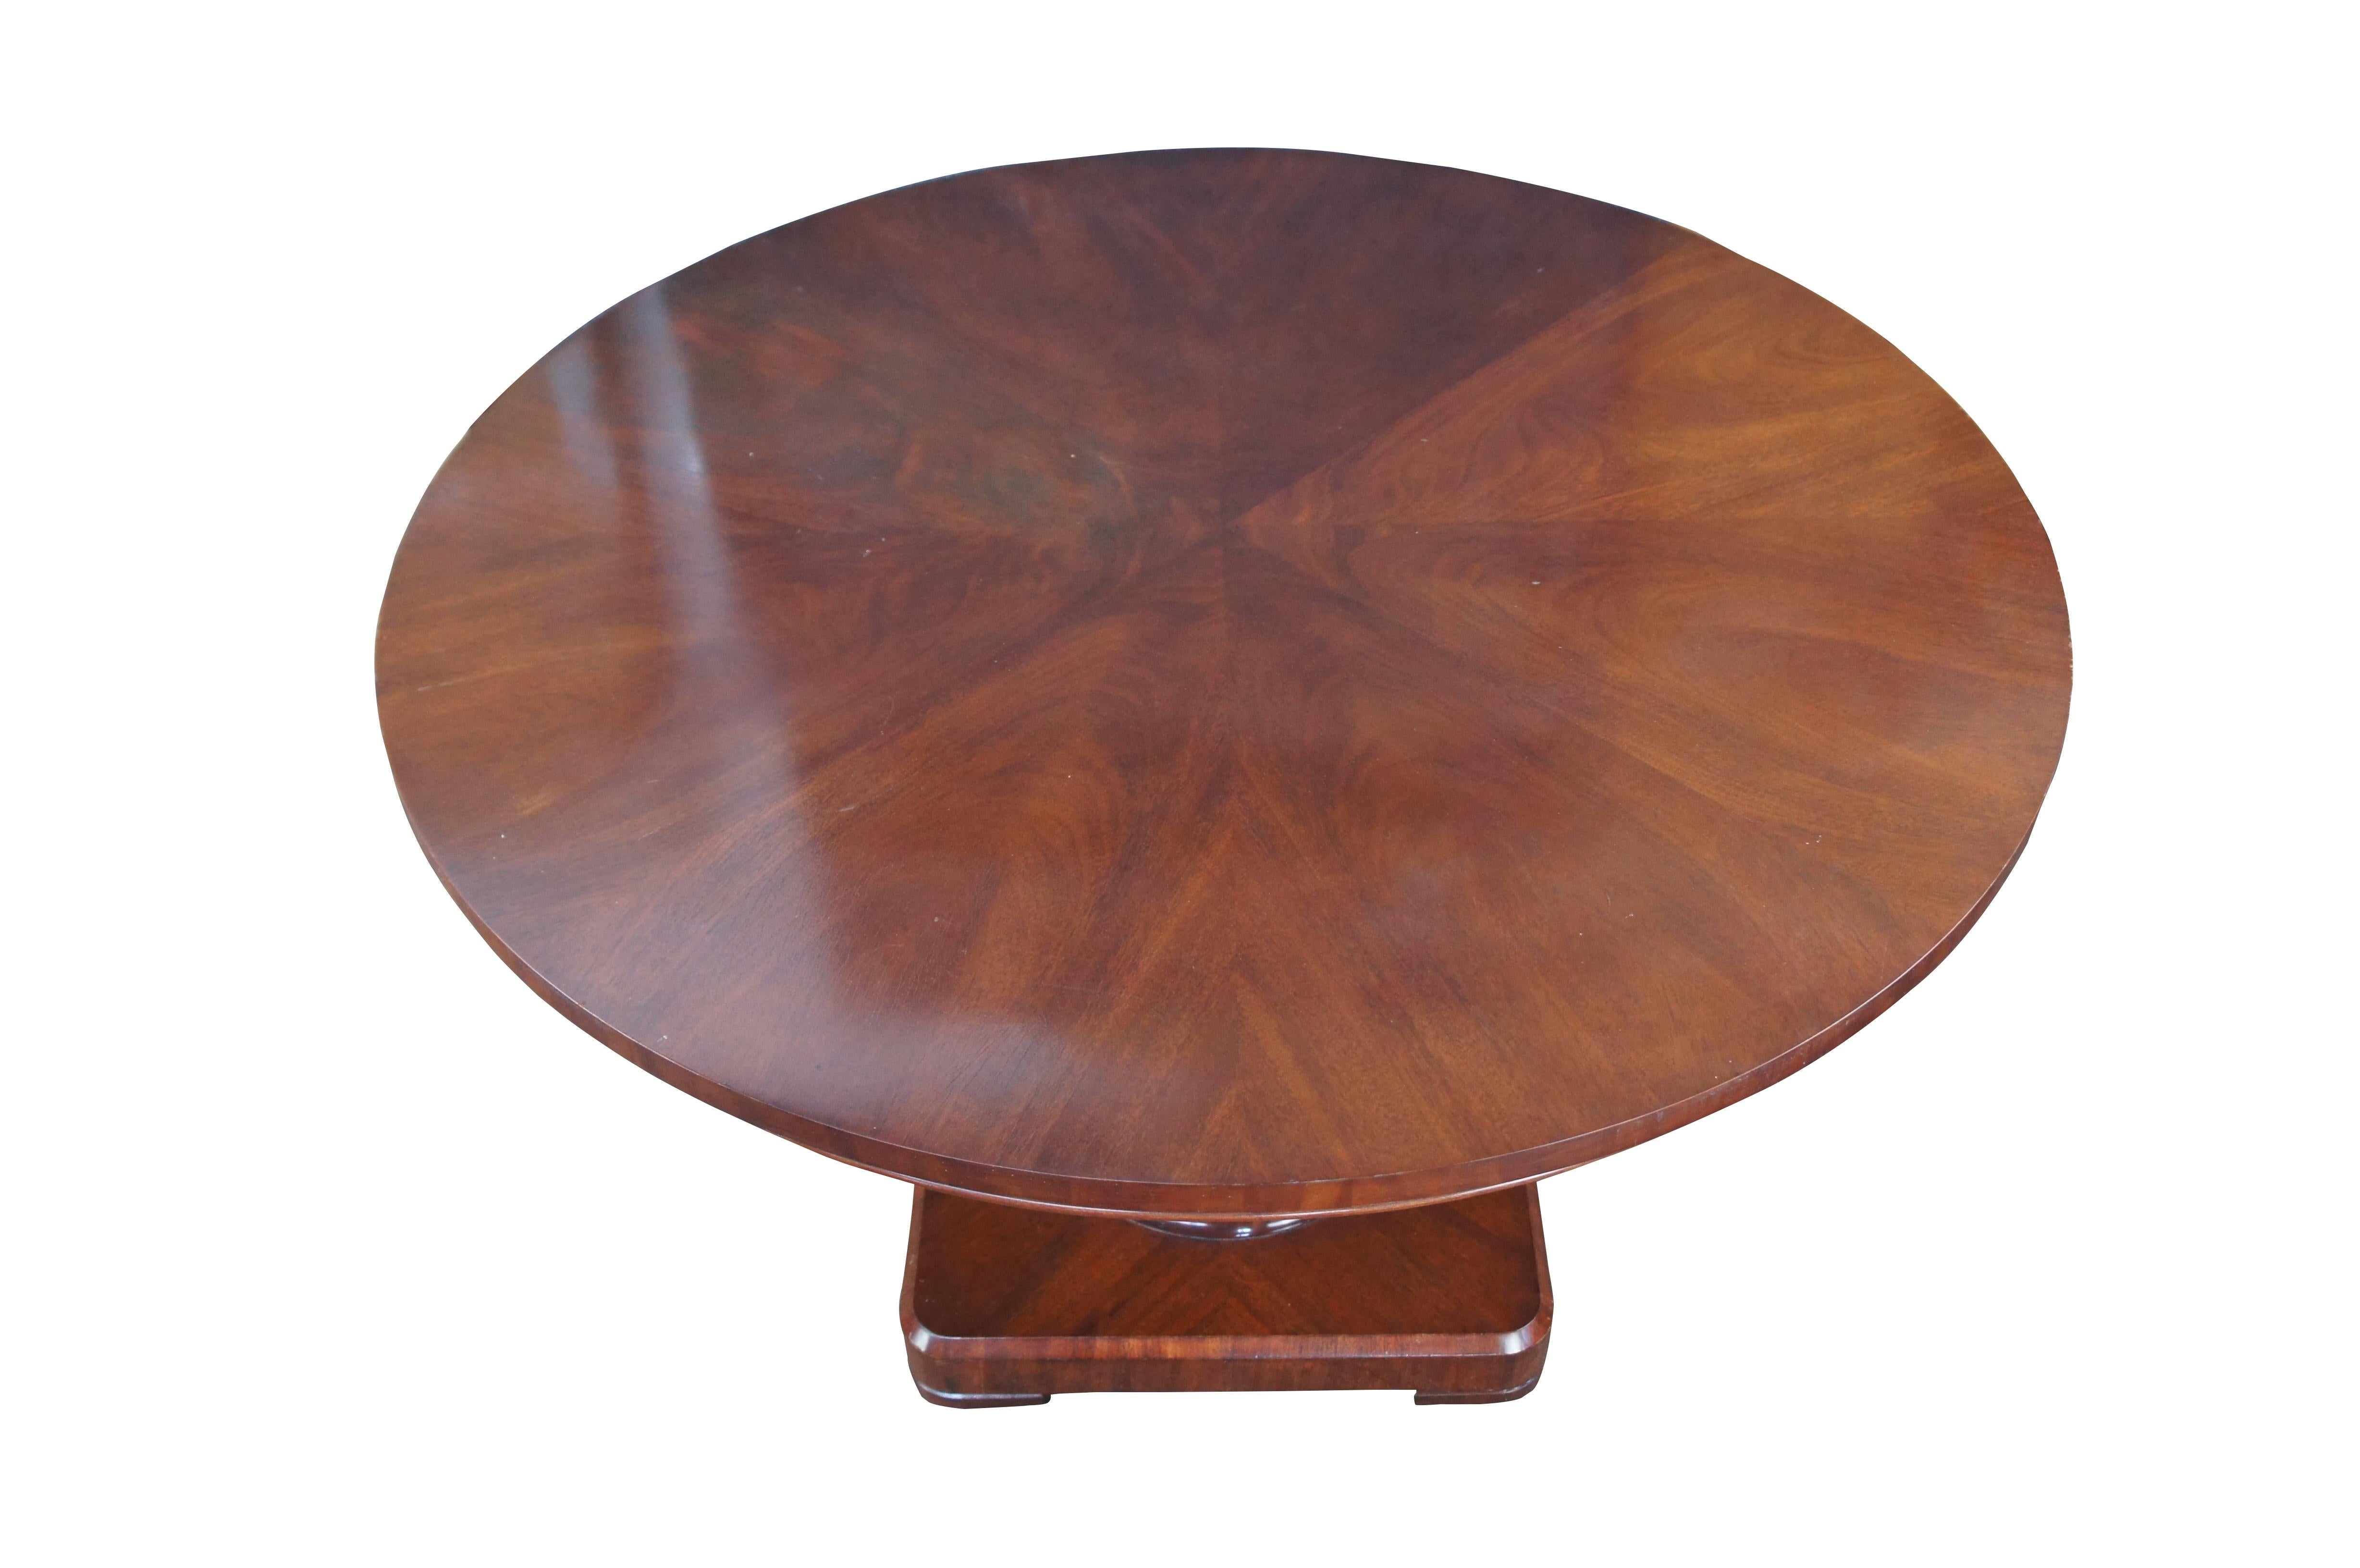 Ralph Lauren’s Mayfair collection is inspired by the elegance of Mediterranean design with a hint of Old Hollywood glamour. Impeccably crafted from solid mahogany wood with a rich swirled grain, the center table is set upon a plinth base with a